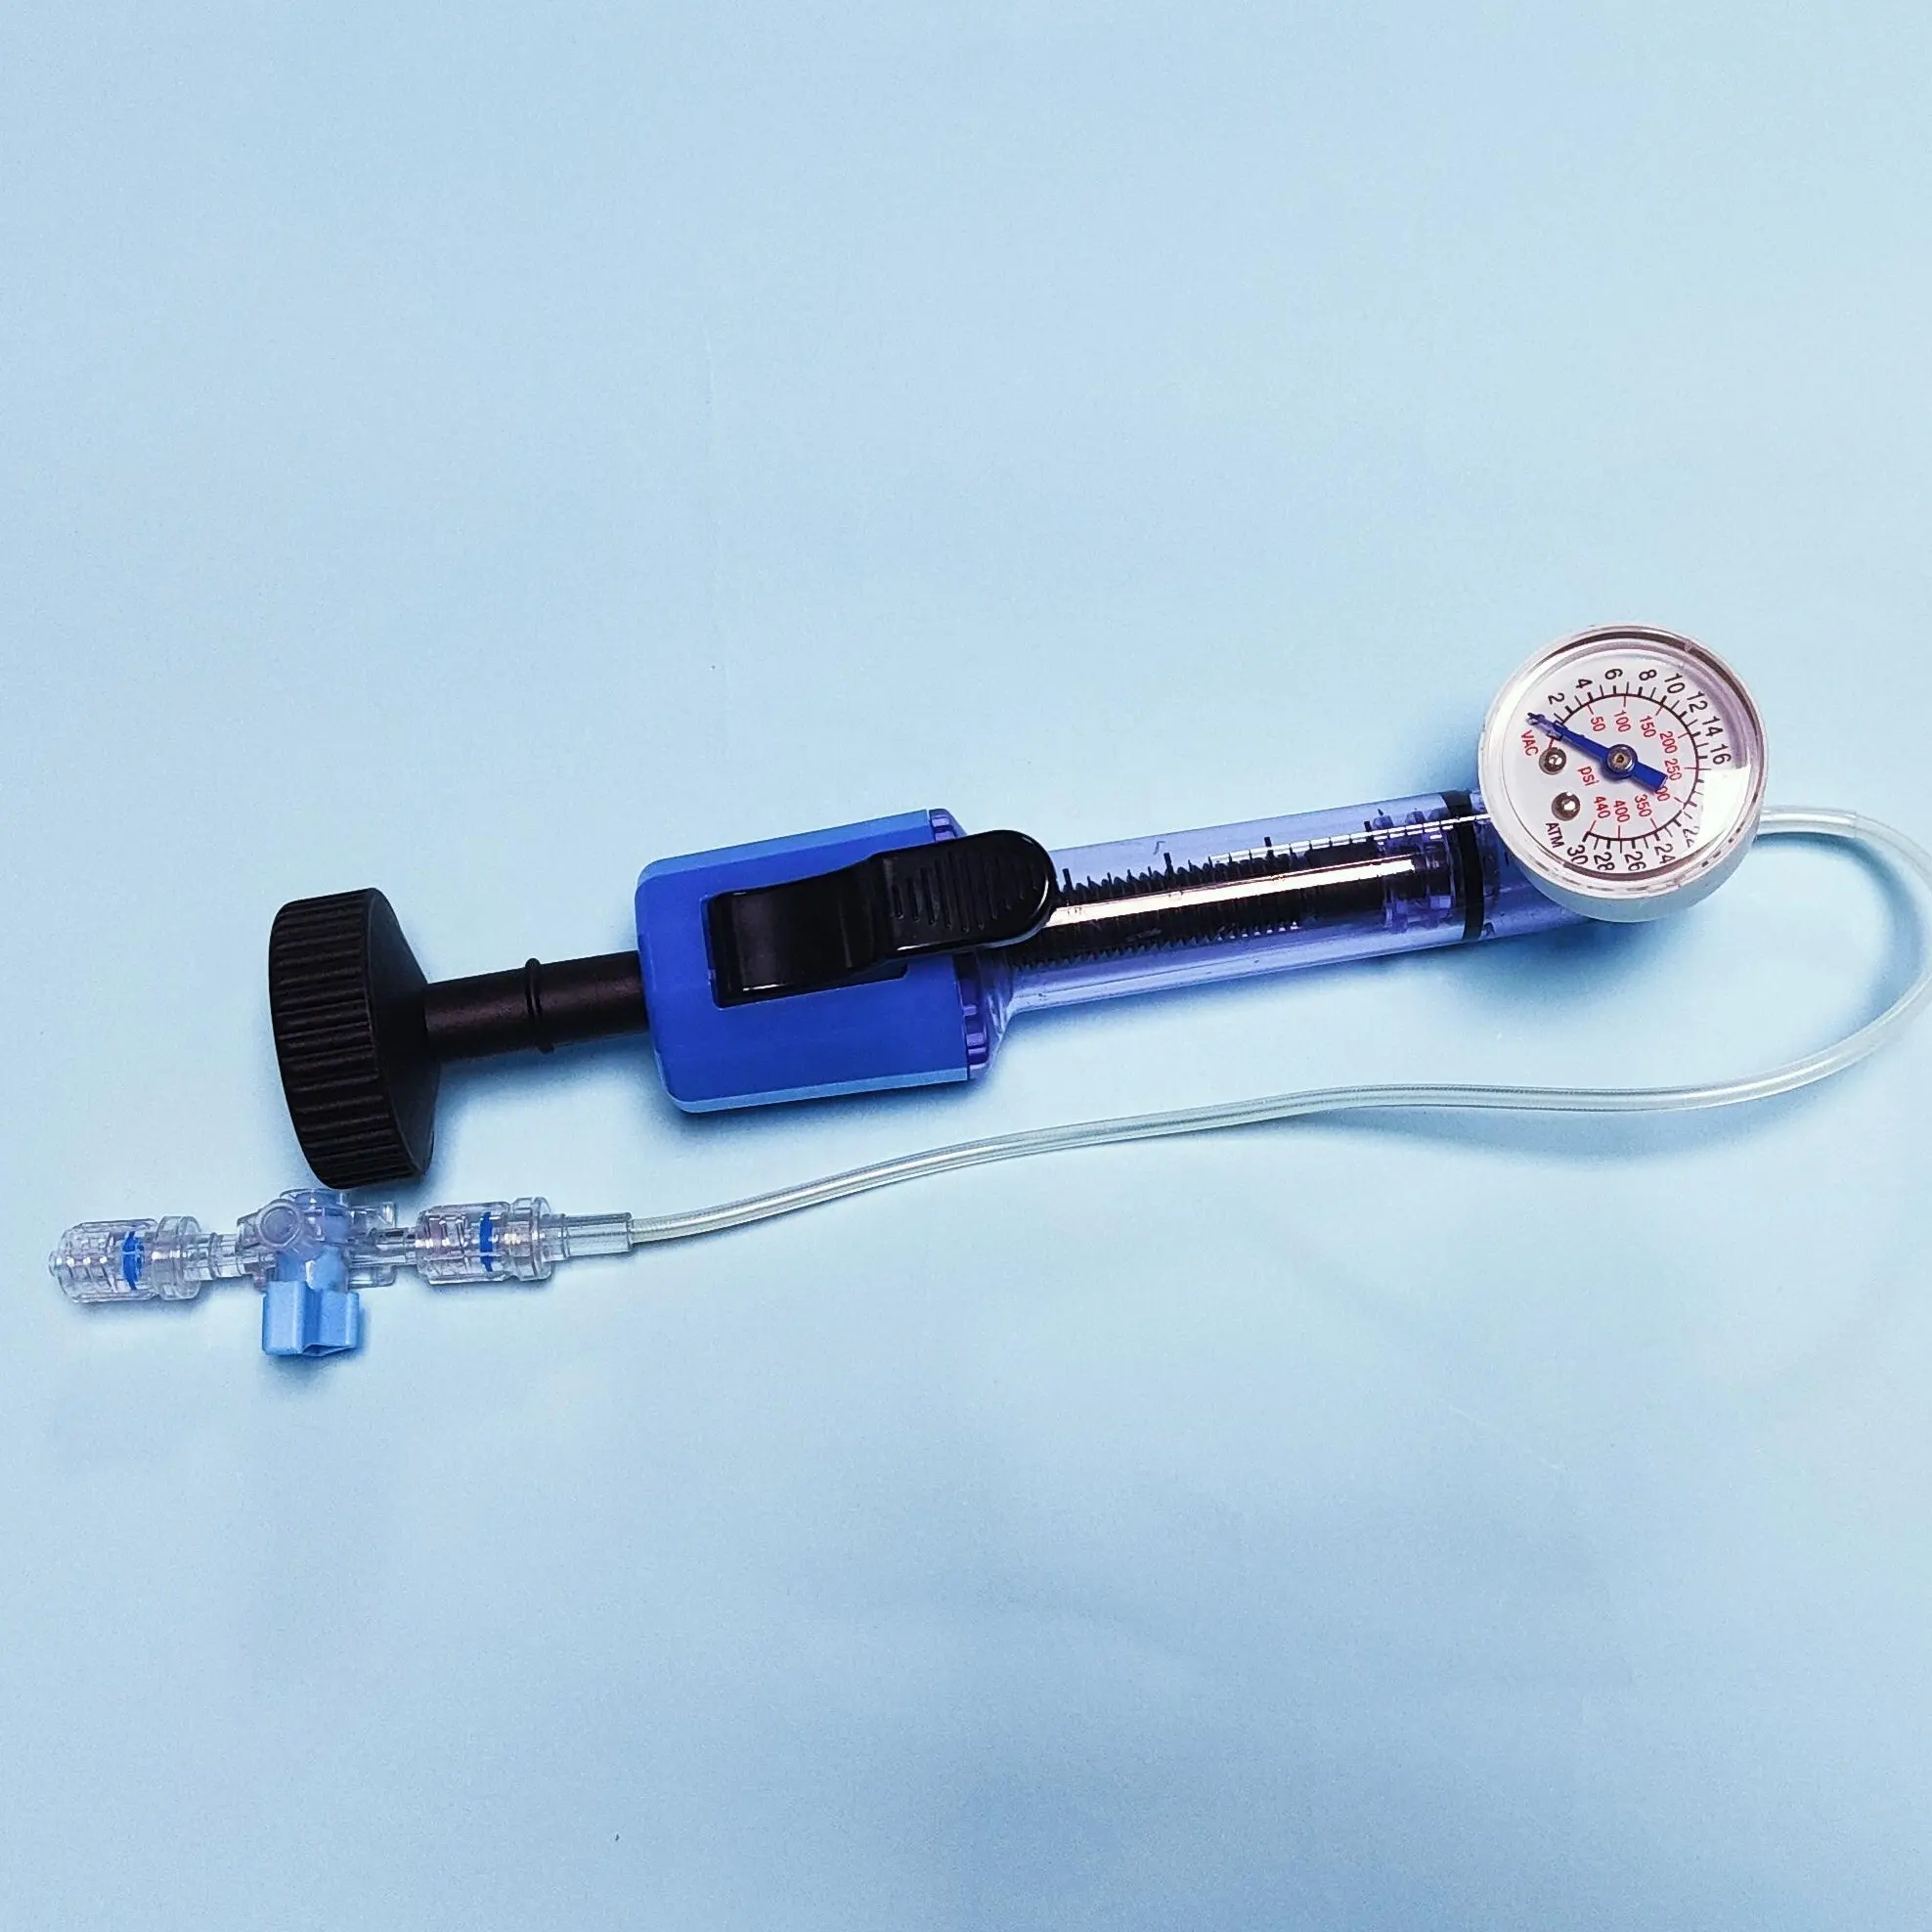 Tianck Medical manufacturer inflator with Y connector 30atm 40atm balloon inflation device